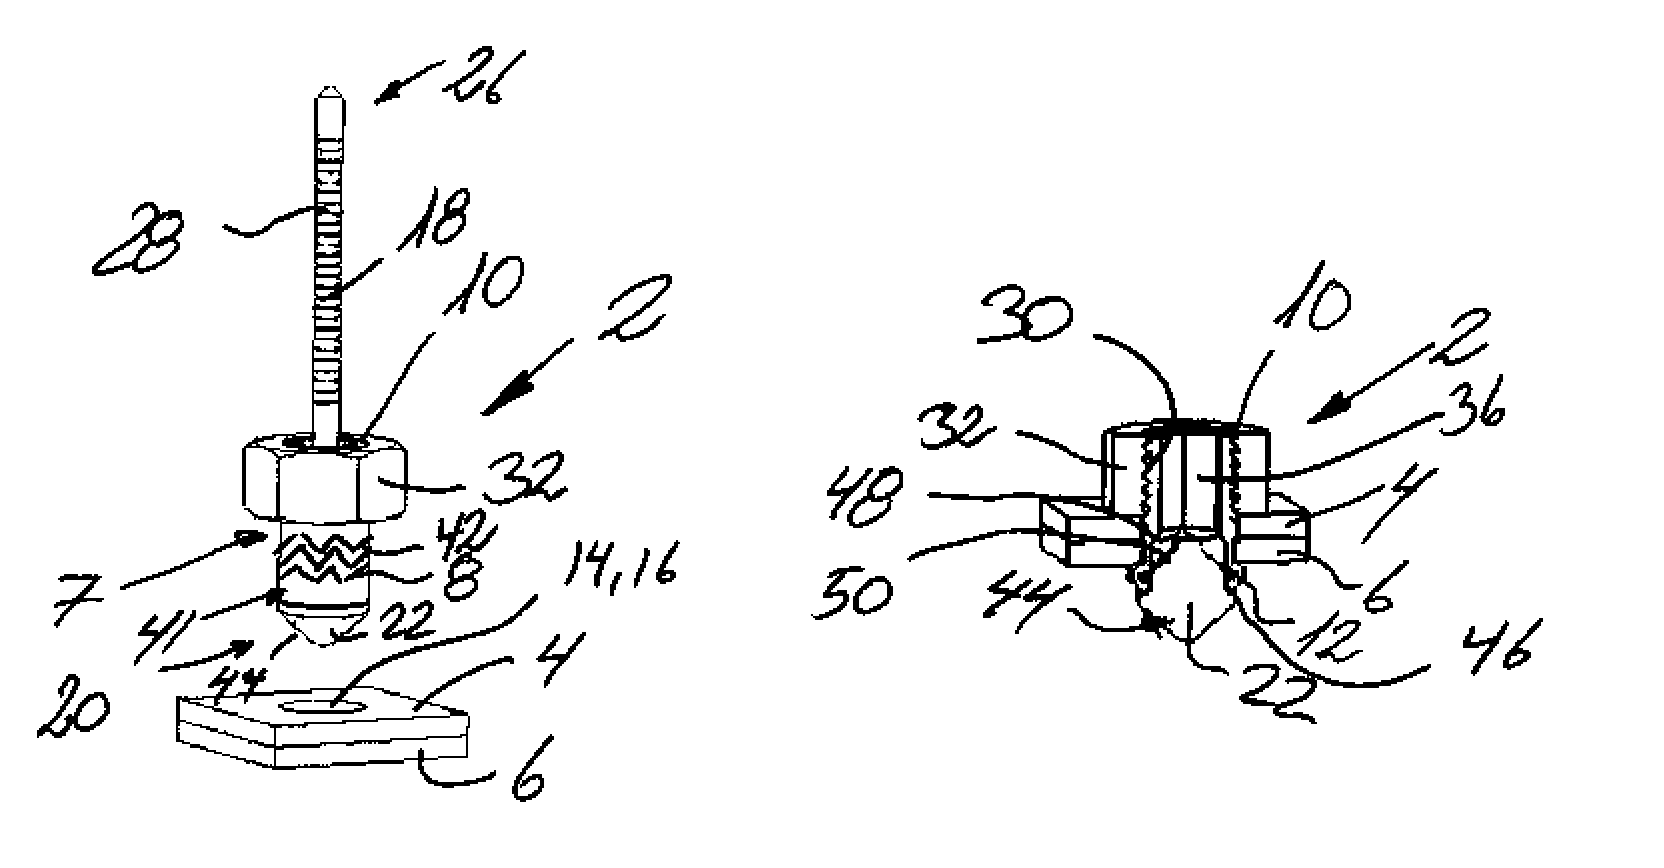 Mounting/assembly element for assembling workpieces, particularly overlapping plates and/or components